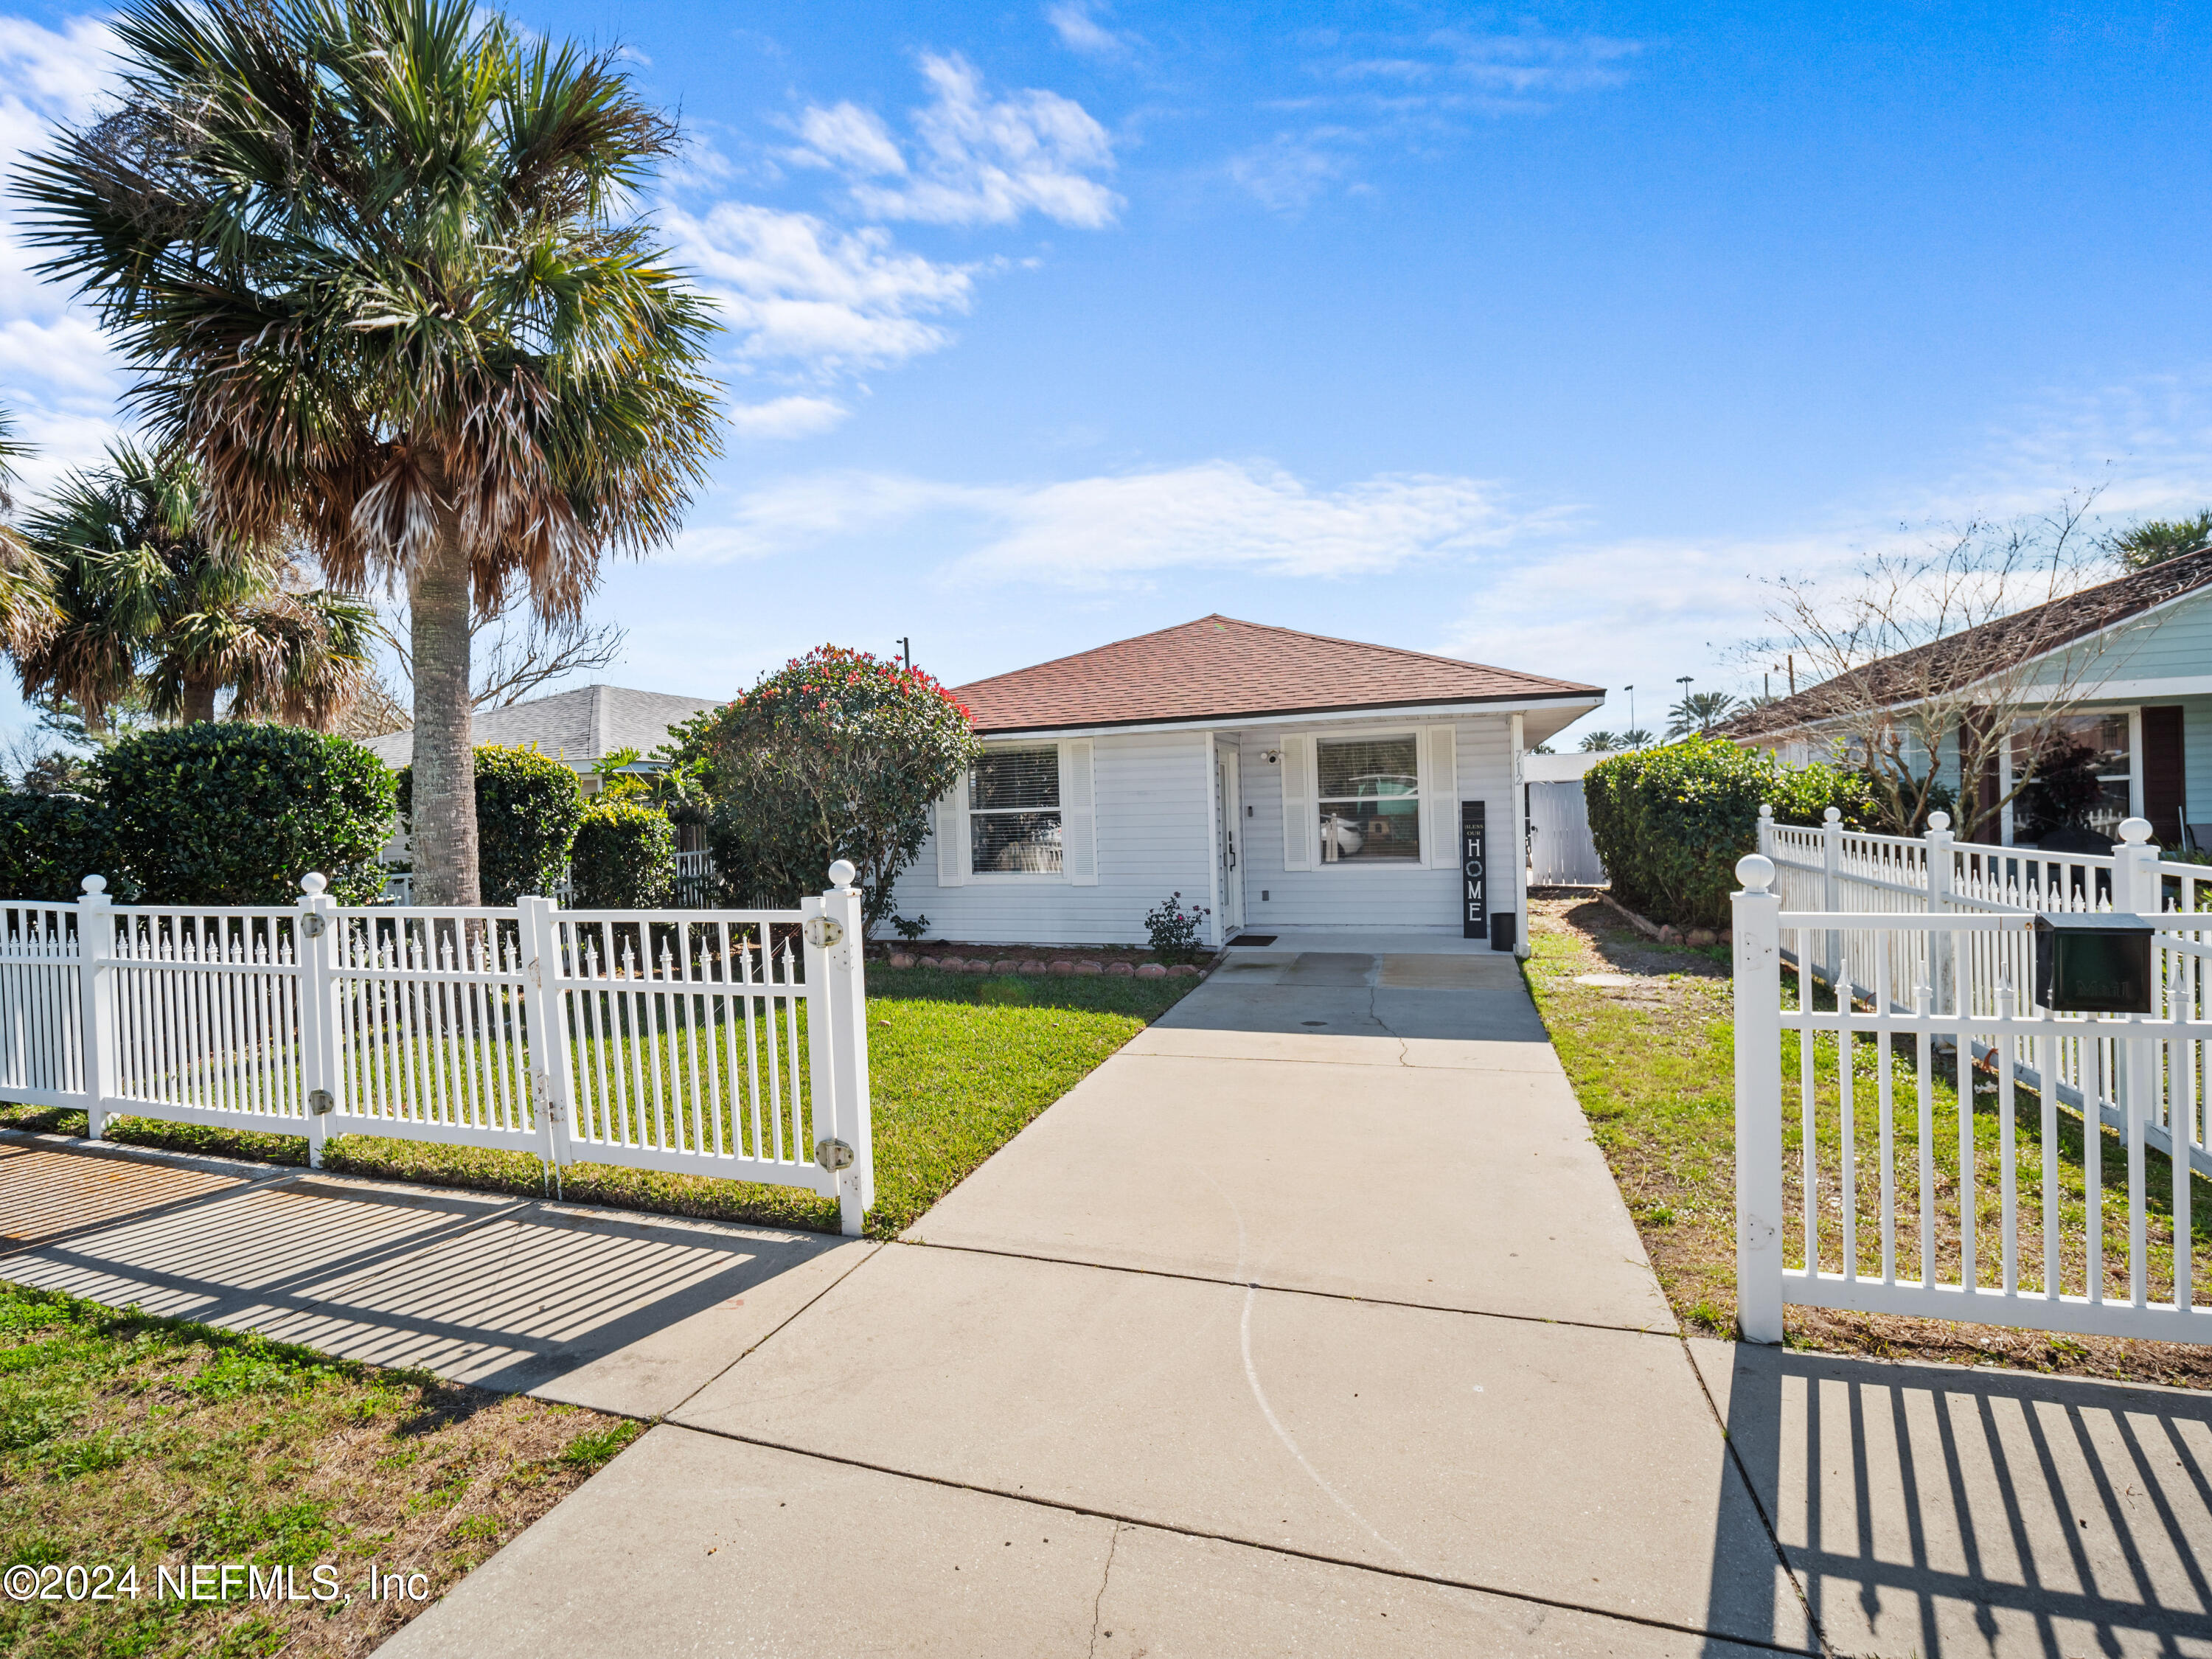 Jacksonville Beach, FL home for sale located at 712 3rd Avenue S, Jacksonville Beach, FL 32250